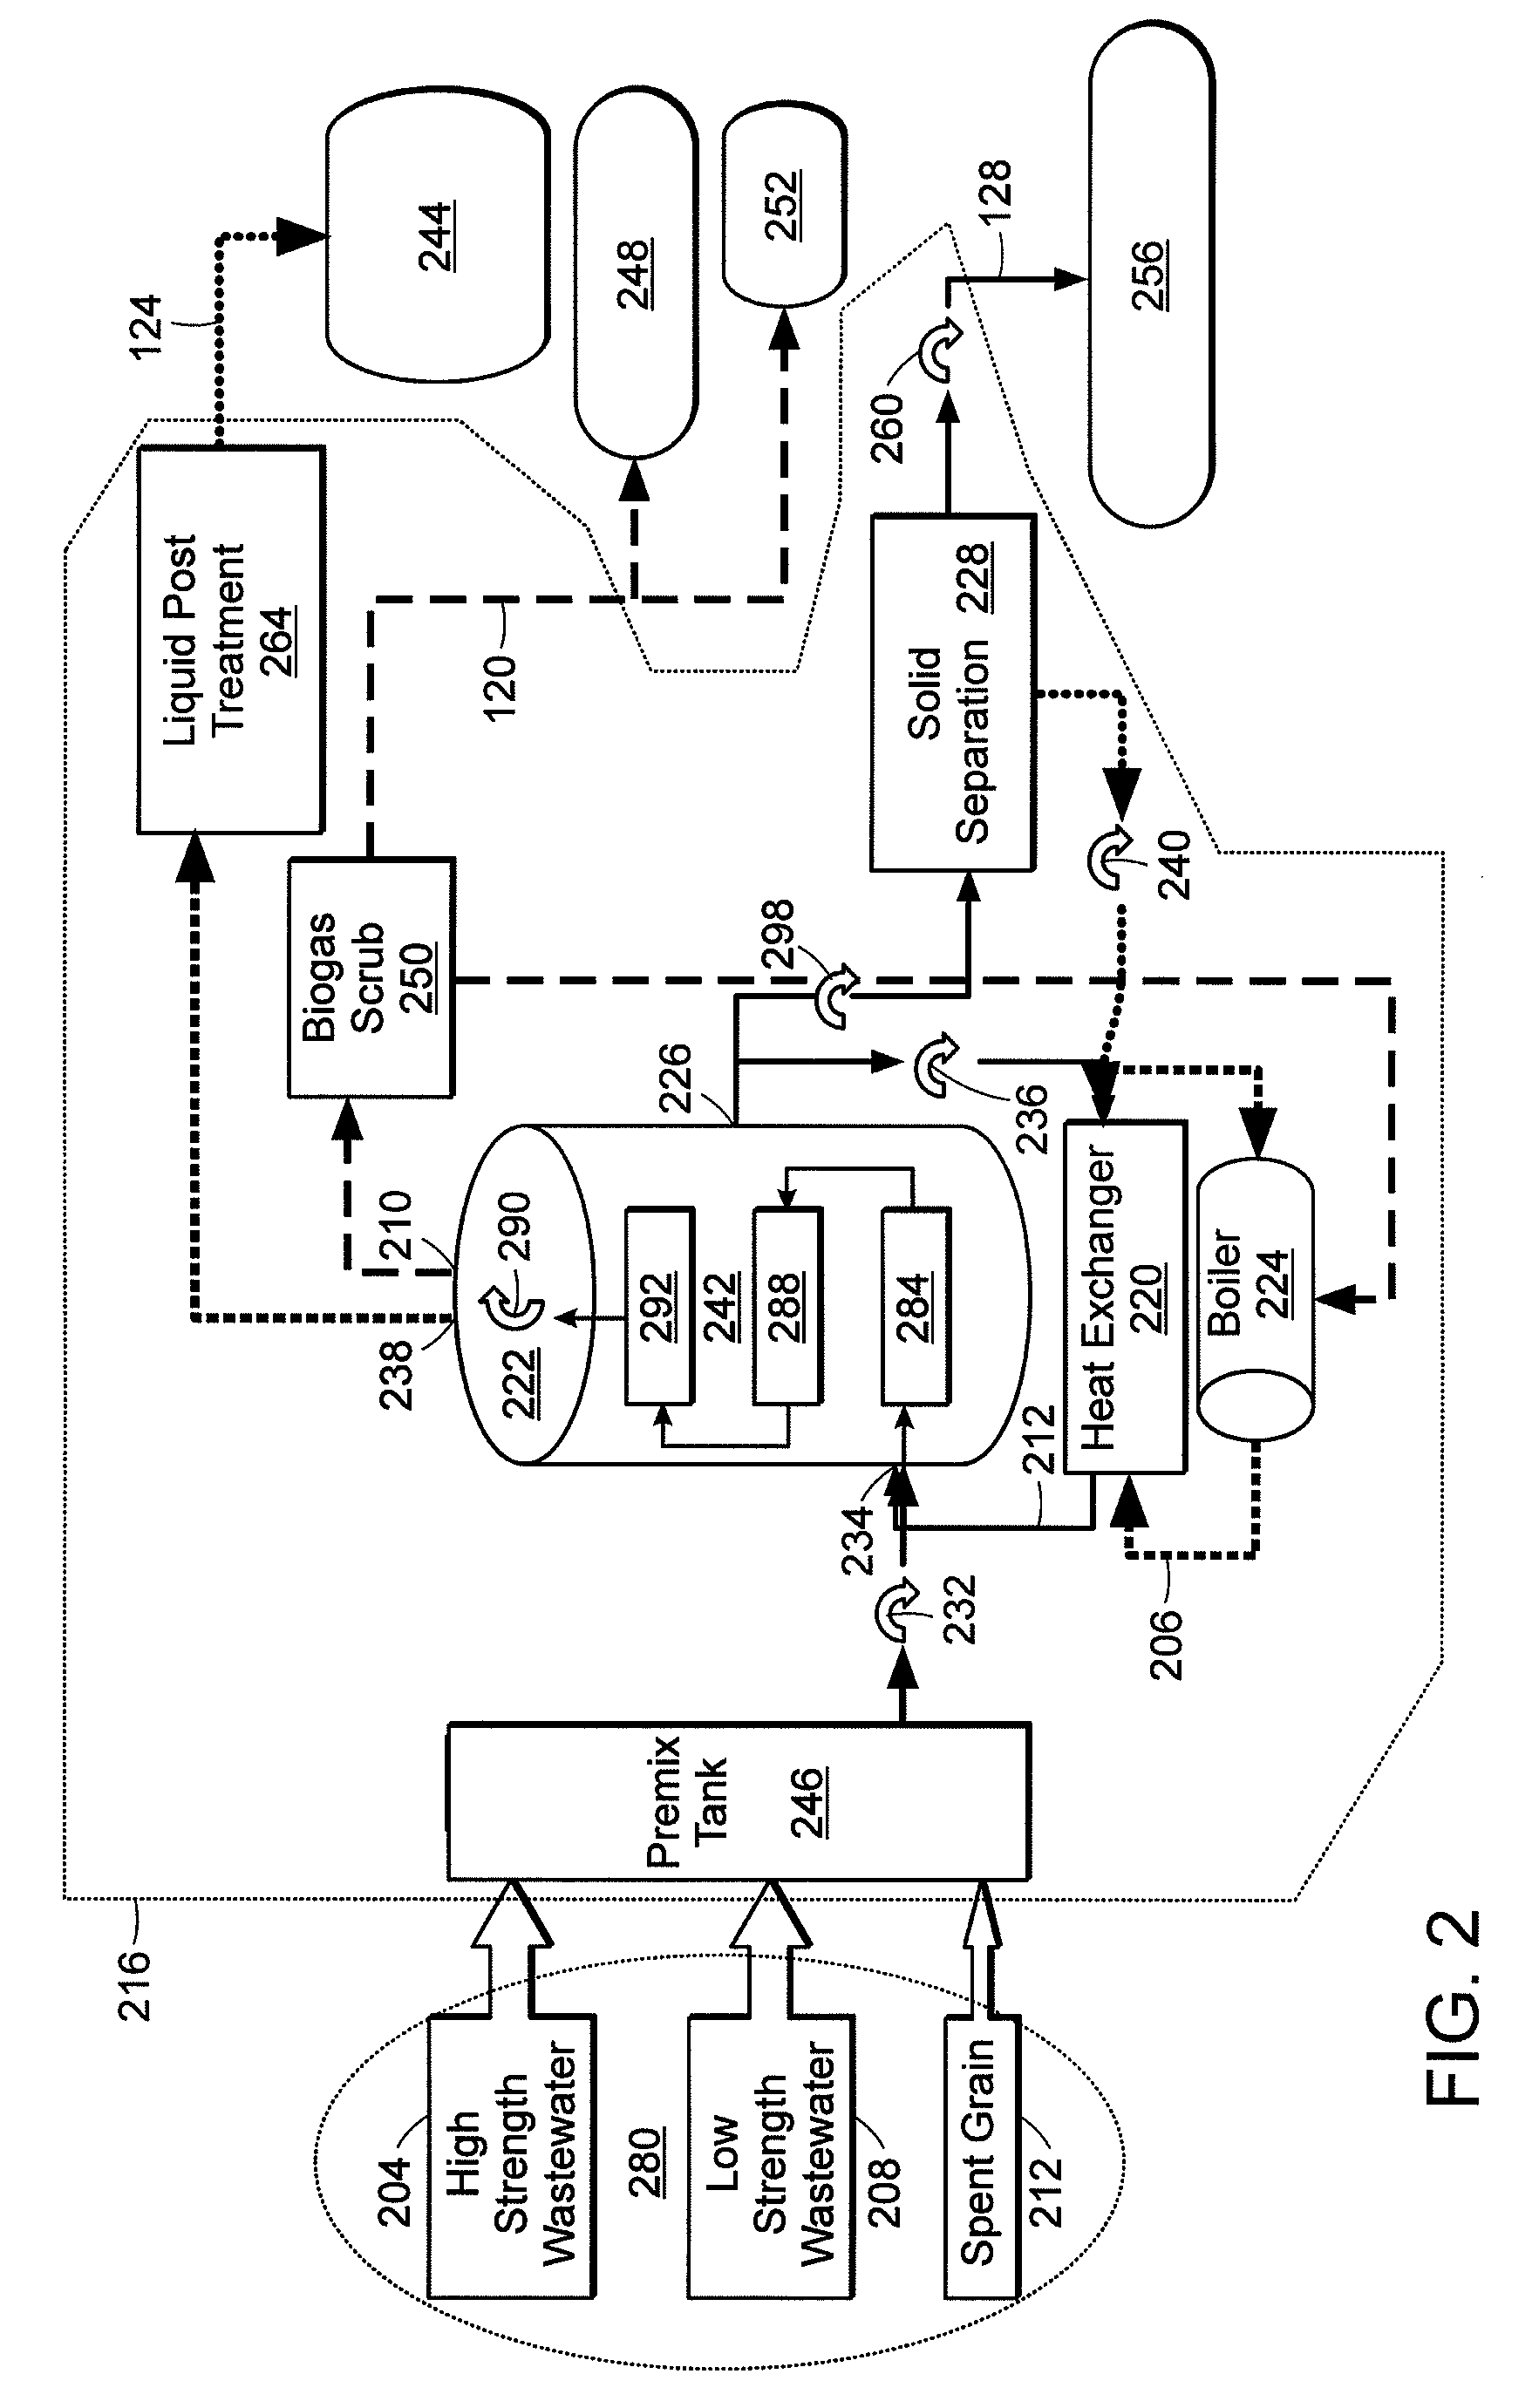 Method and apparatus for processing organic waste